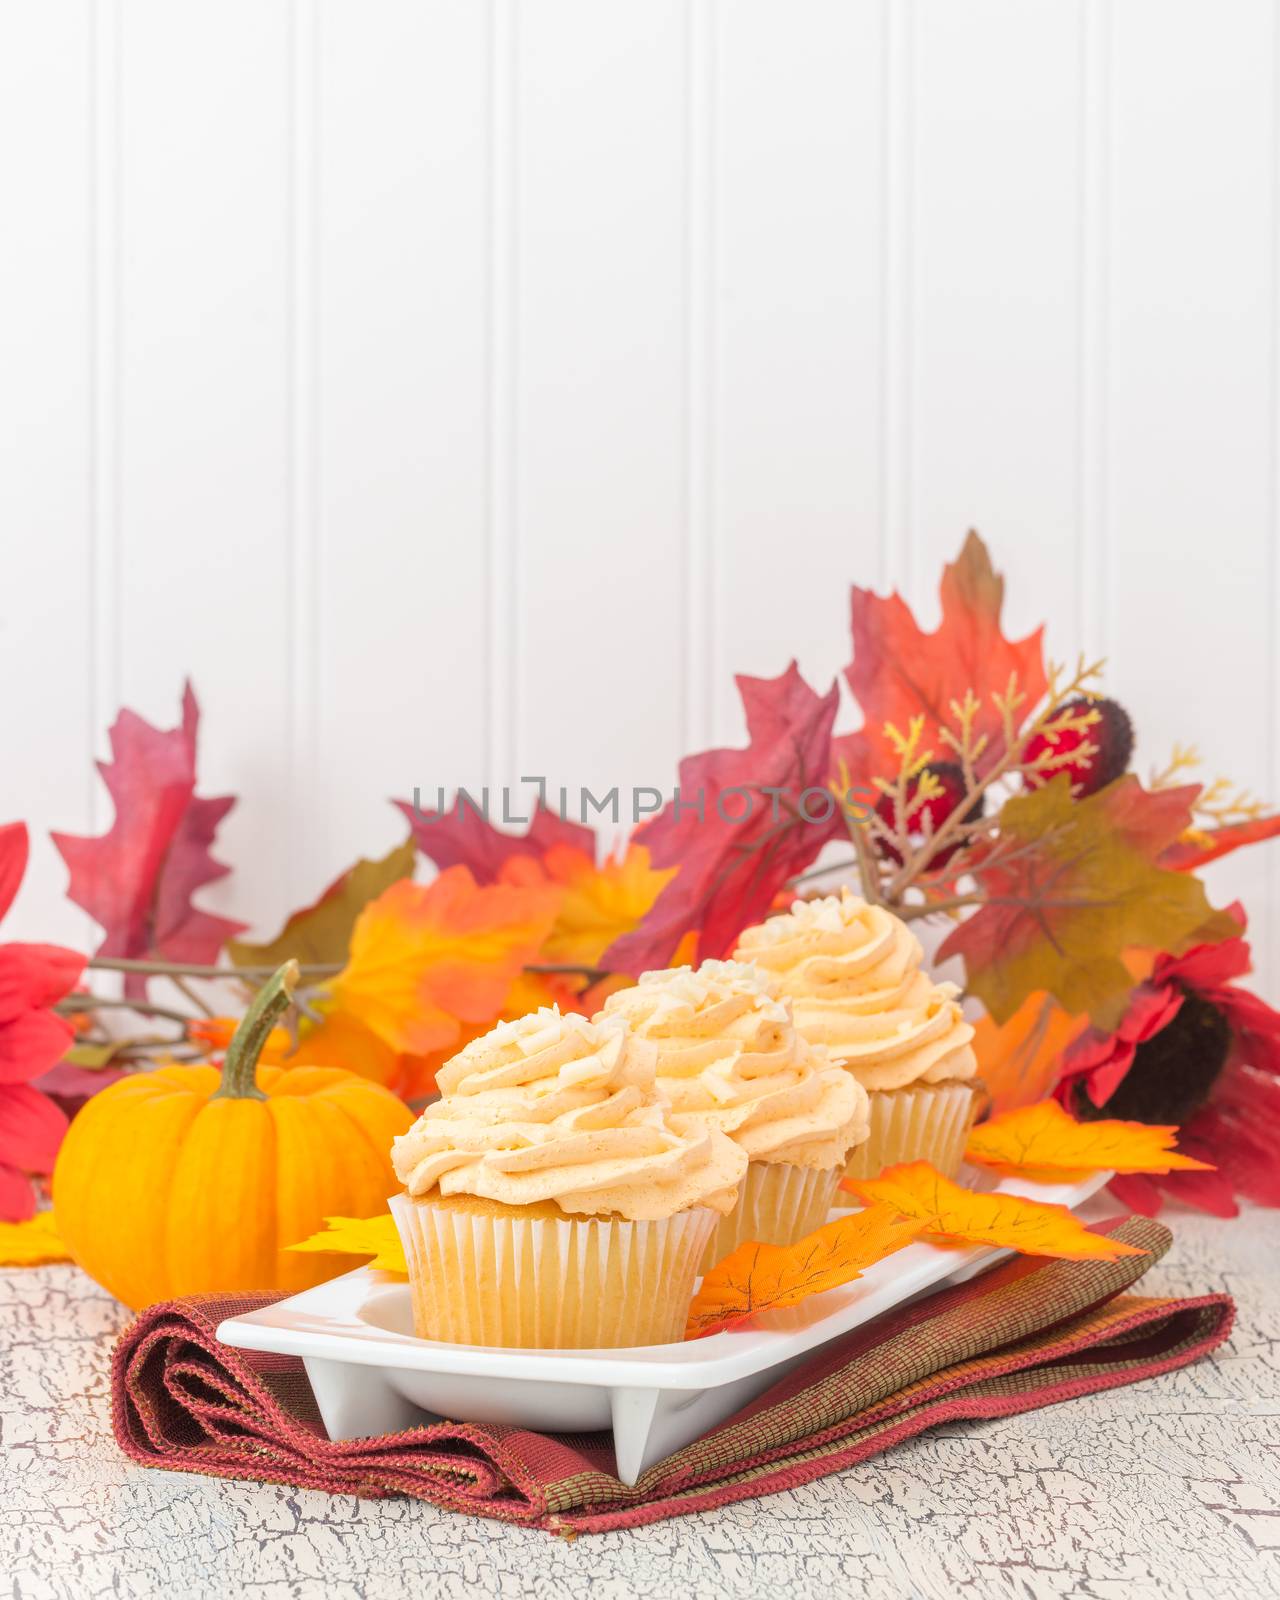 Pumpkin Spice Cupcakes by billberryphotography